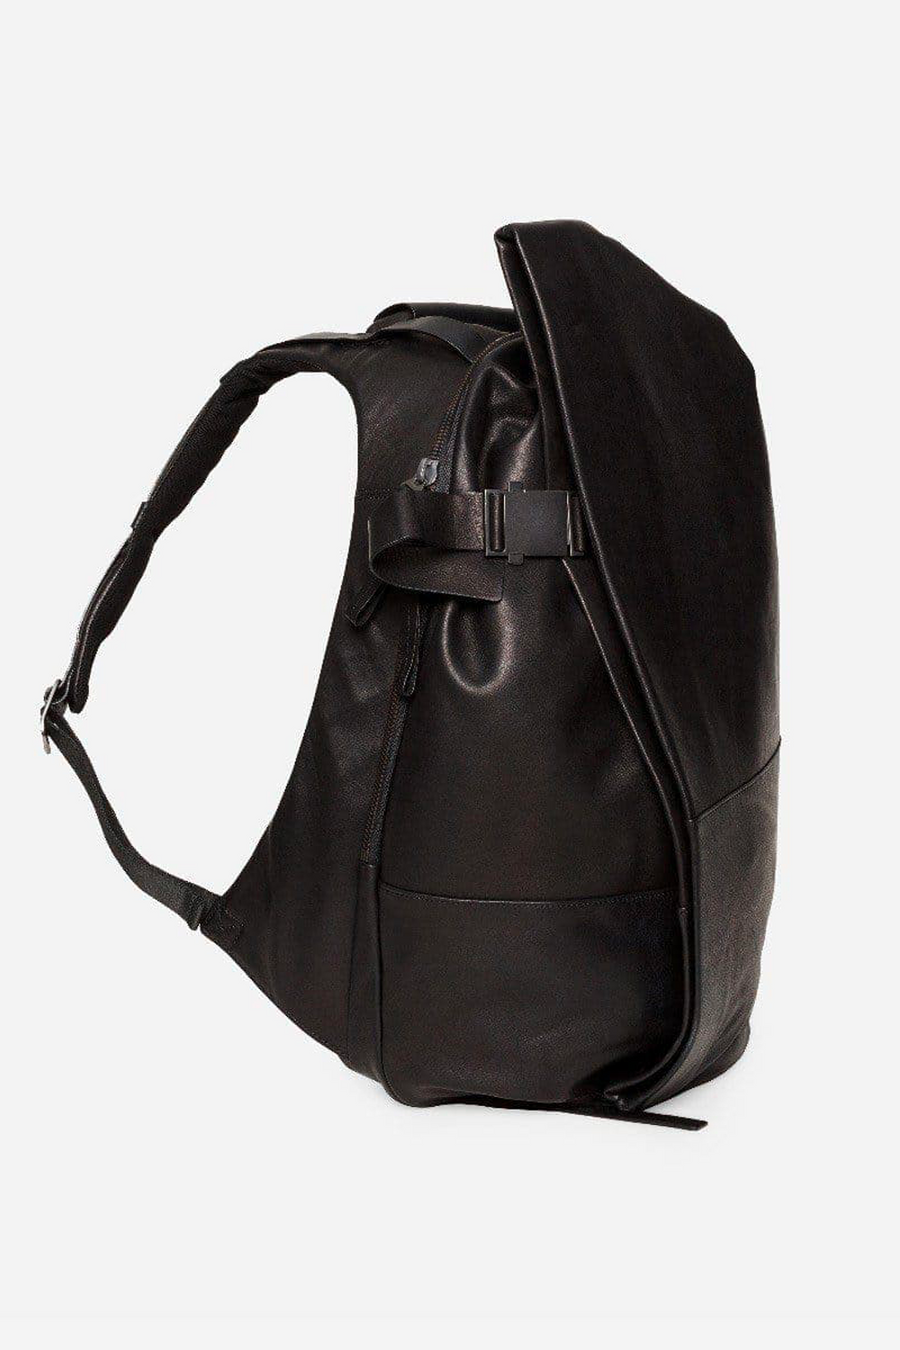 Buy the Cote & Ciel Isar Backpack Medium Alias Leather in Black at Intro. Spend £50 for free UK delivery. Official stockists. We ship worldwide.